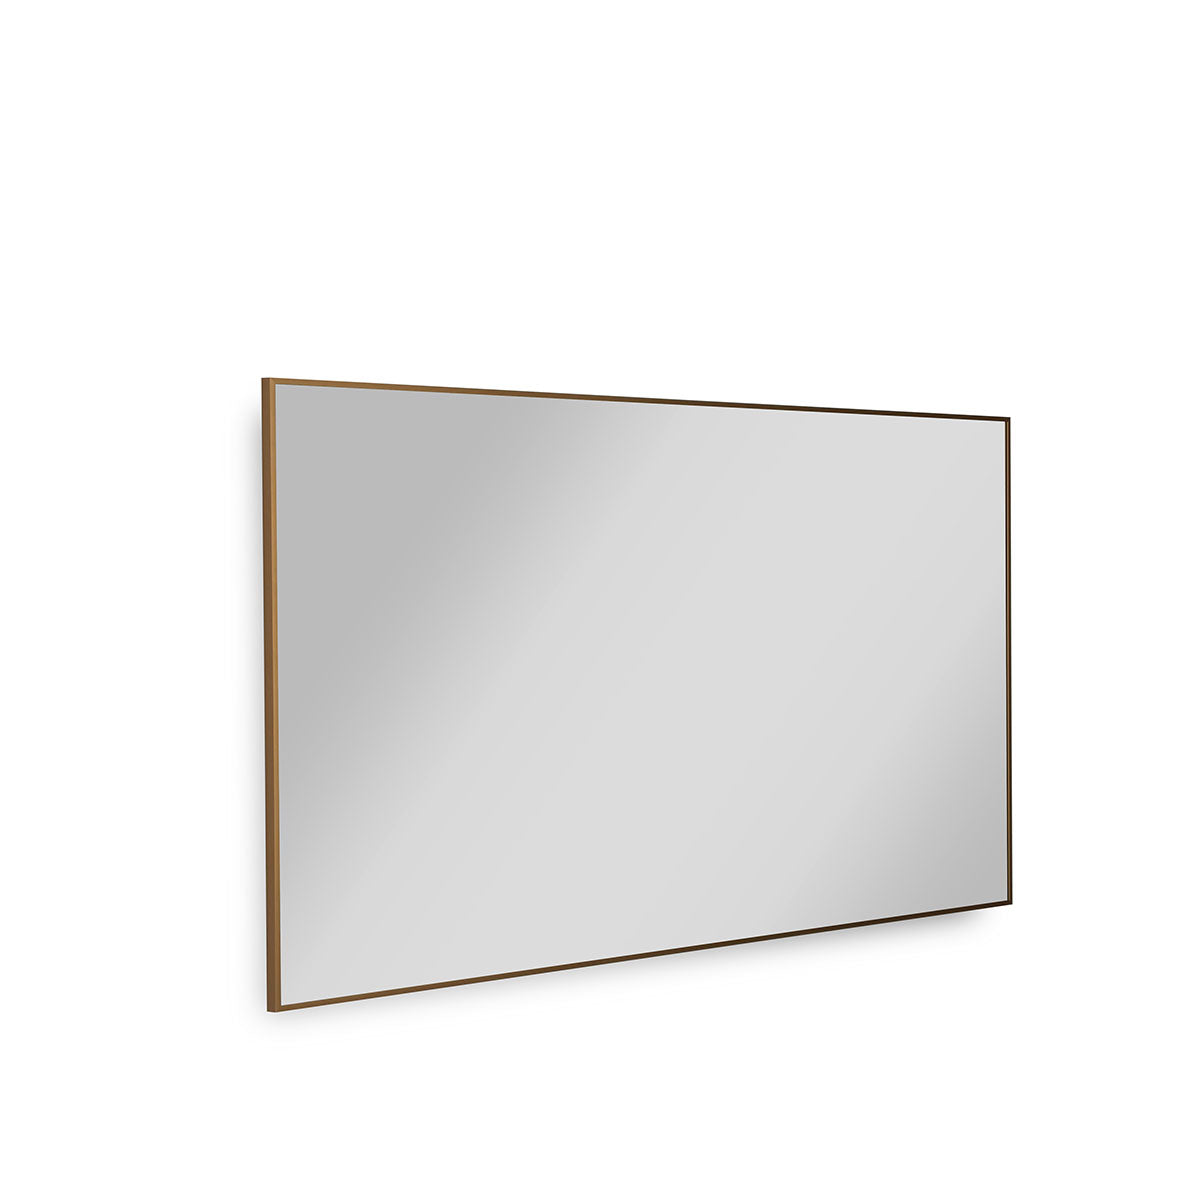 60"w x 32"h Aluminum Rectangle Bathroom Wall Mirror (Brushed Gold) - iStyle Bath